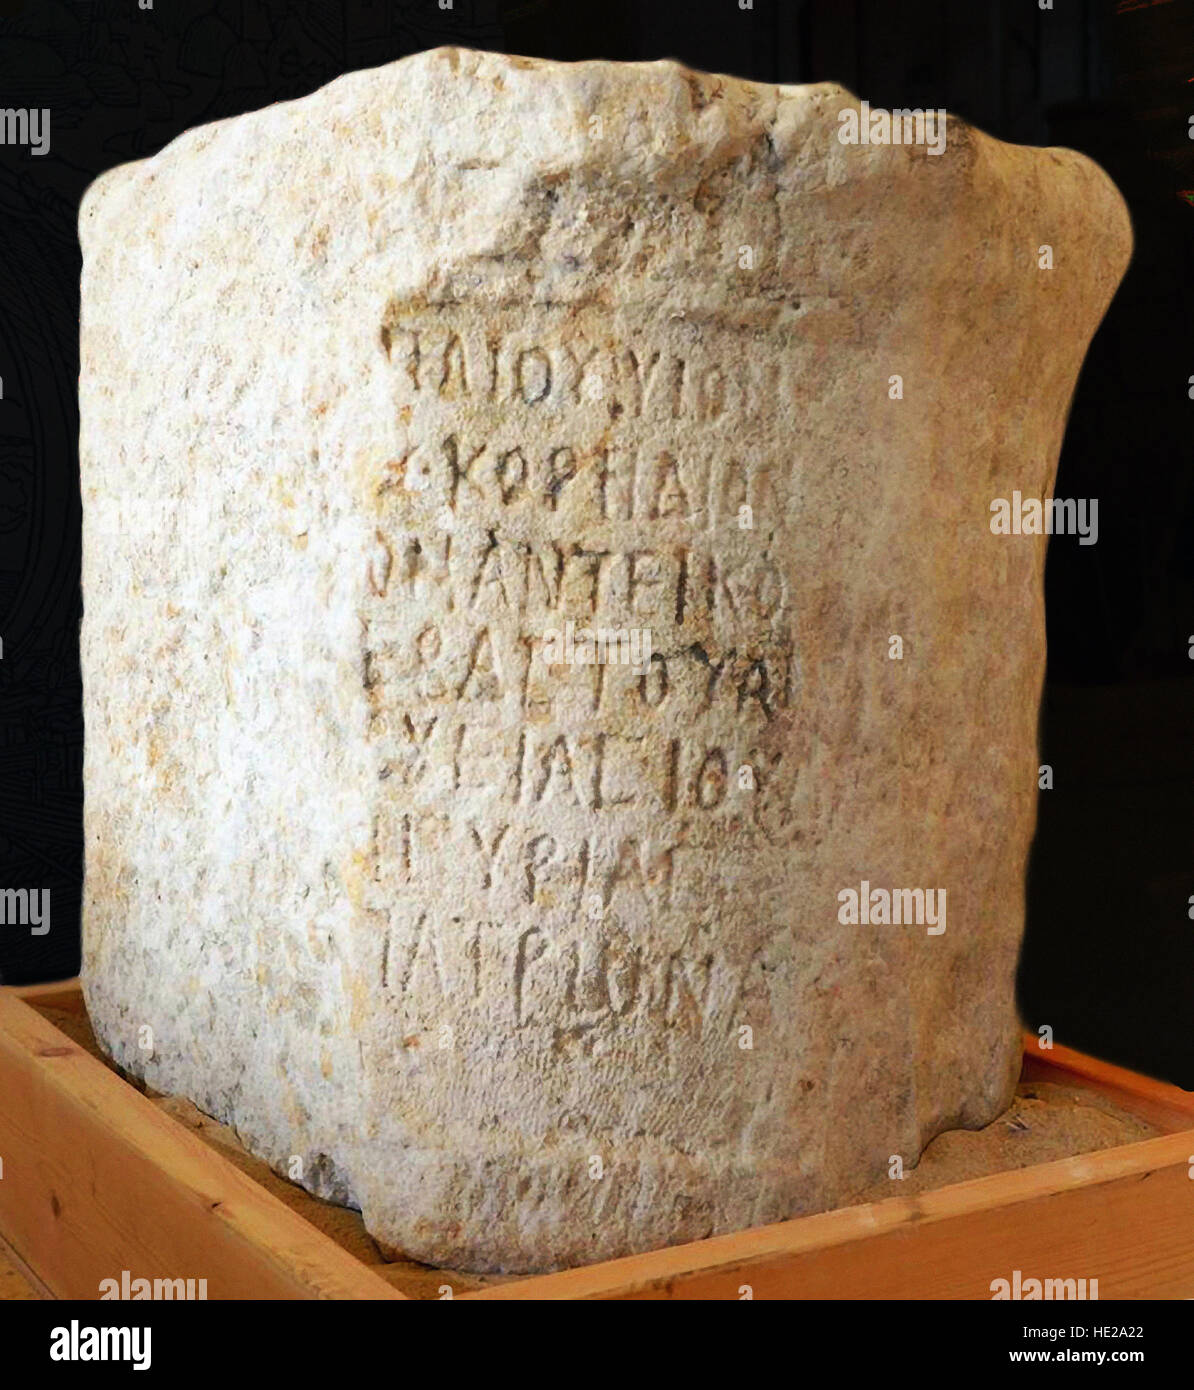 6032. Greek inscription discovered under the sea near Dor (Israel). The text mentions ‘Marcus Paccius governor of the province of Judea…patron of the Stock Photo